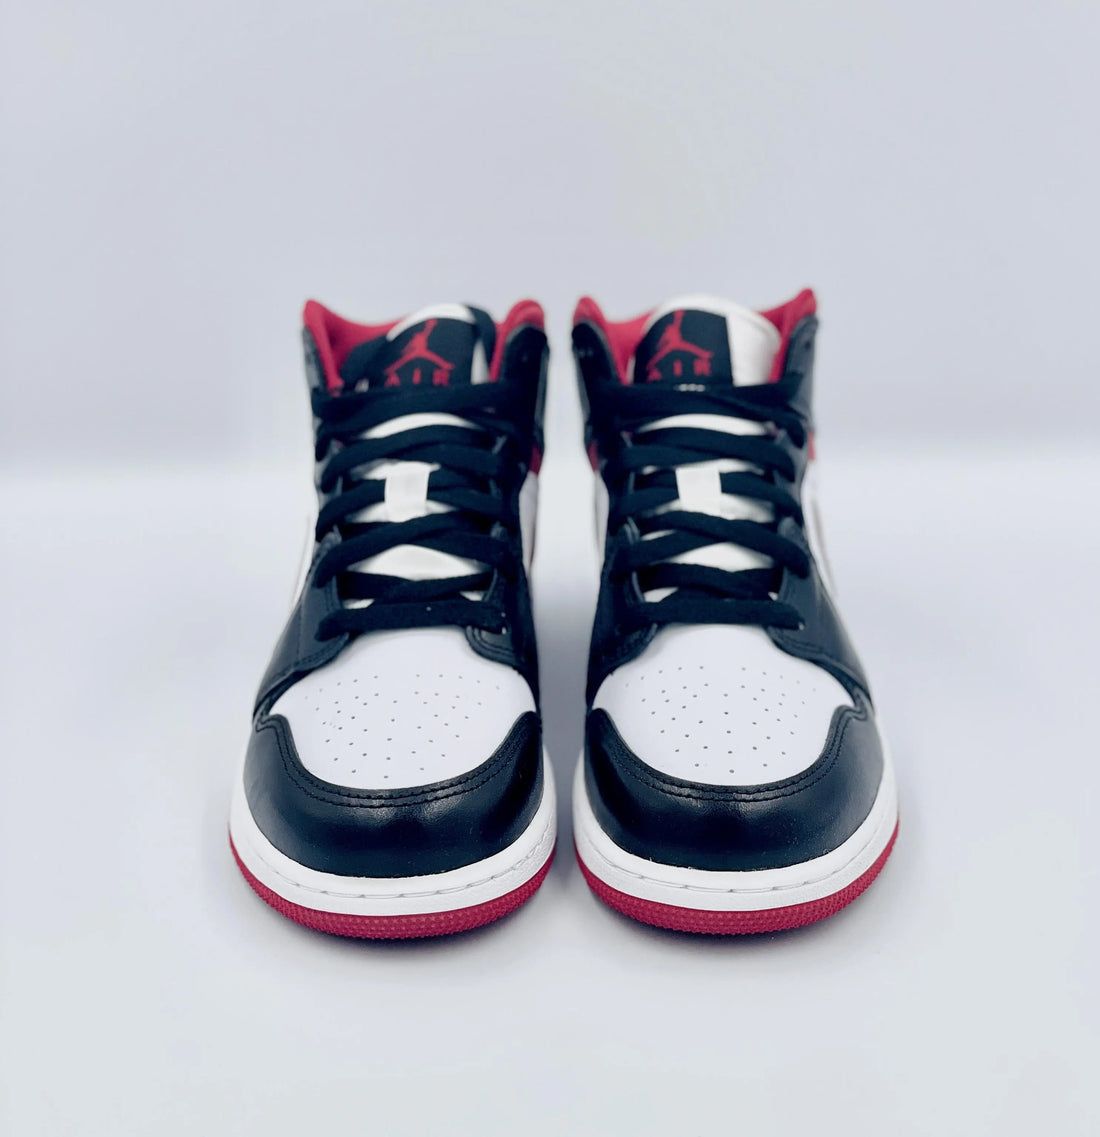 Shop the Air Jordan 1 Mid 'Gym Red' (GS) and discover the latest and hottest shoes from Air Jordan, Nike, Yeezy and more at SA Sneakers, your #1 online store for limited sneakers in Switzerland.